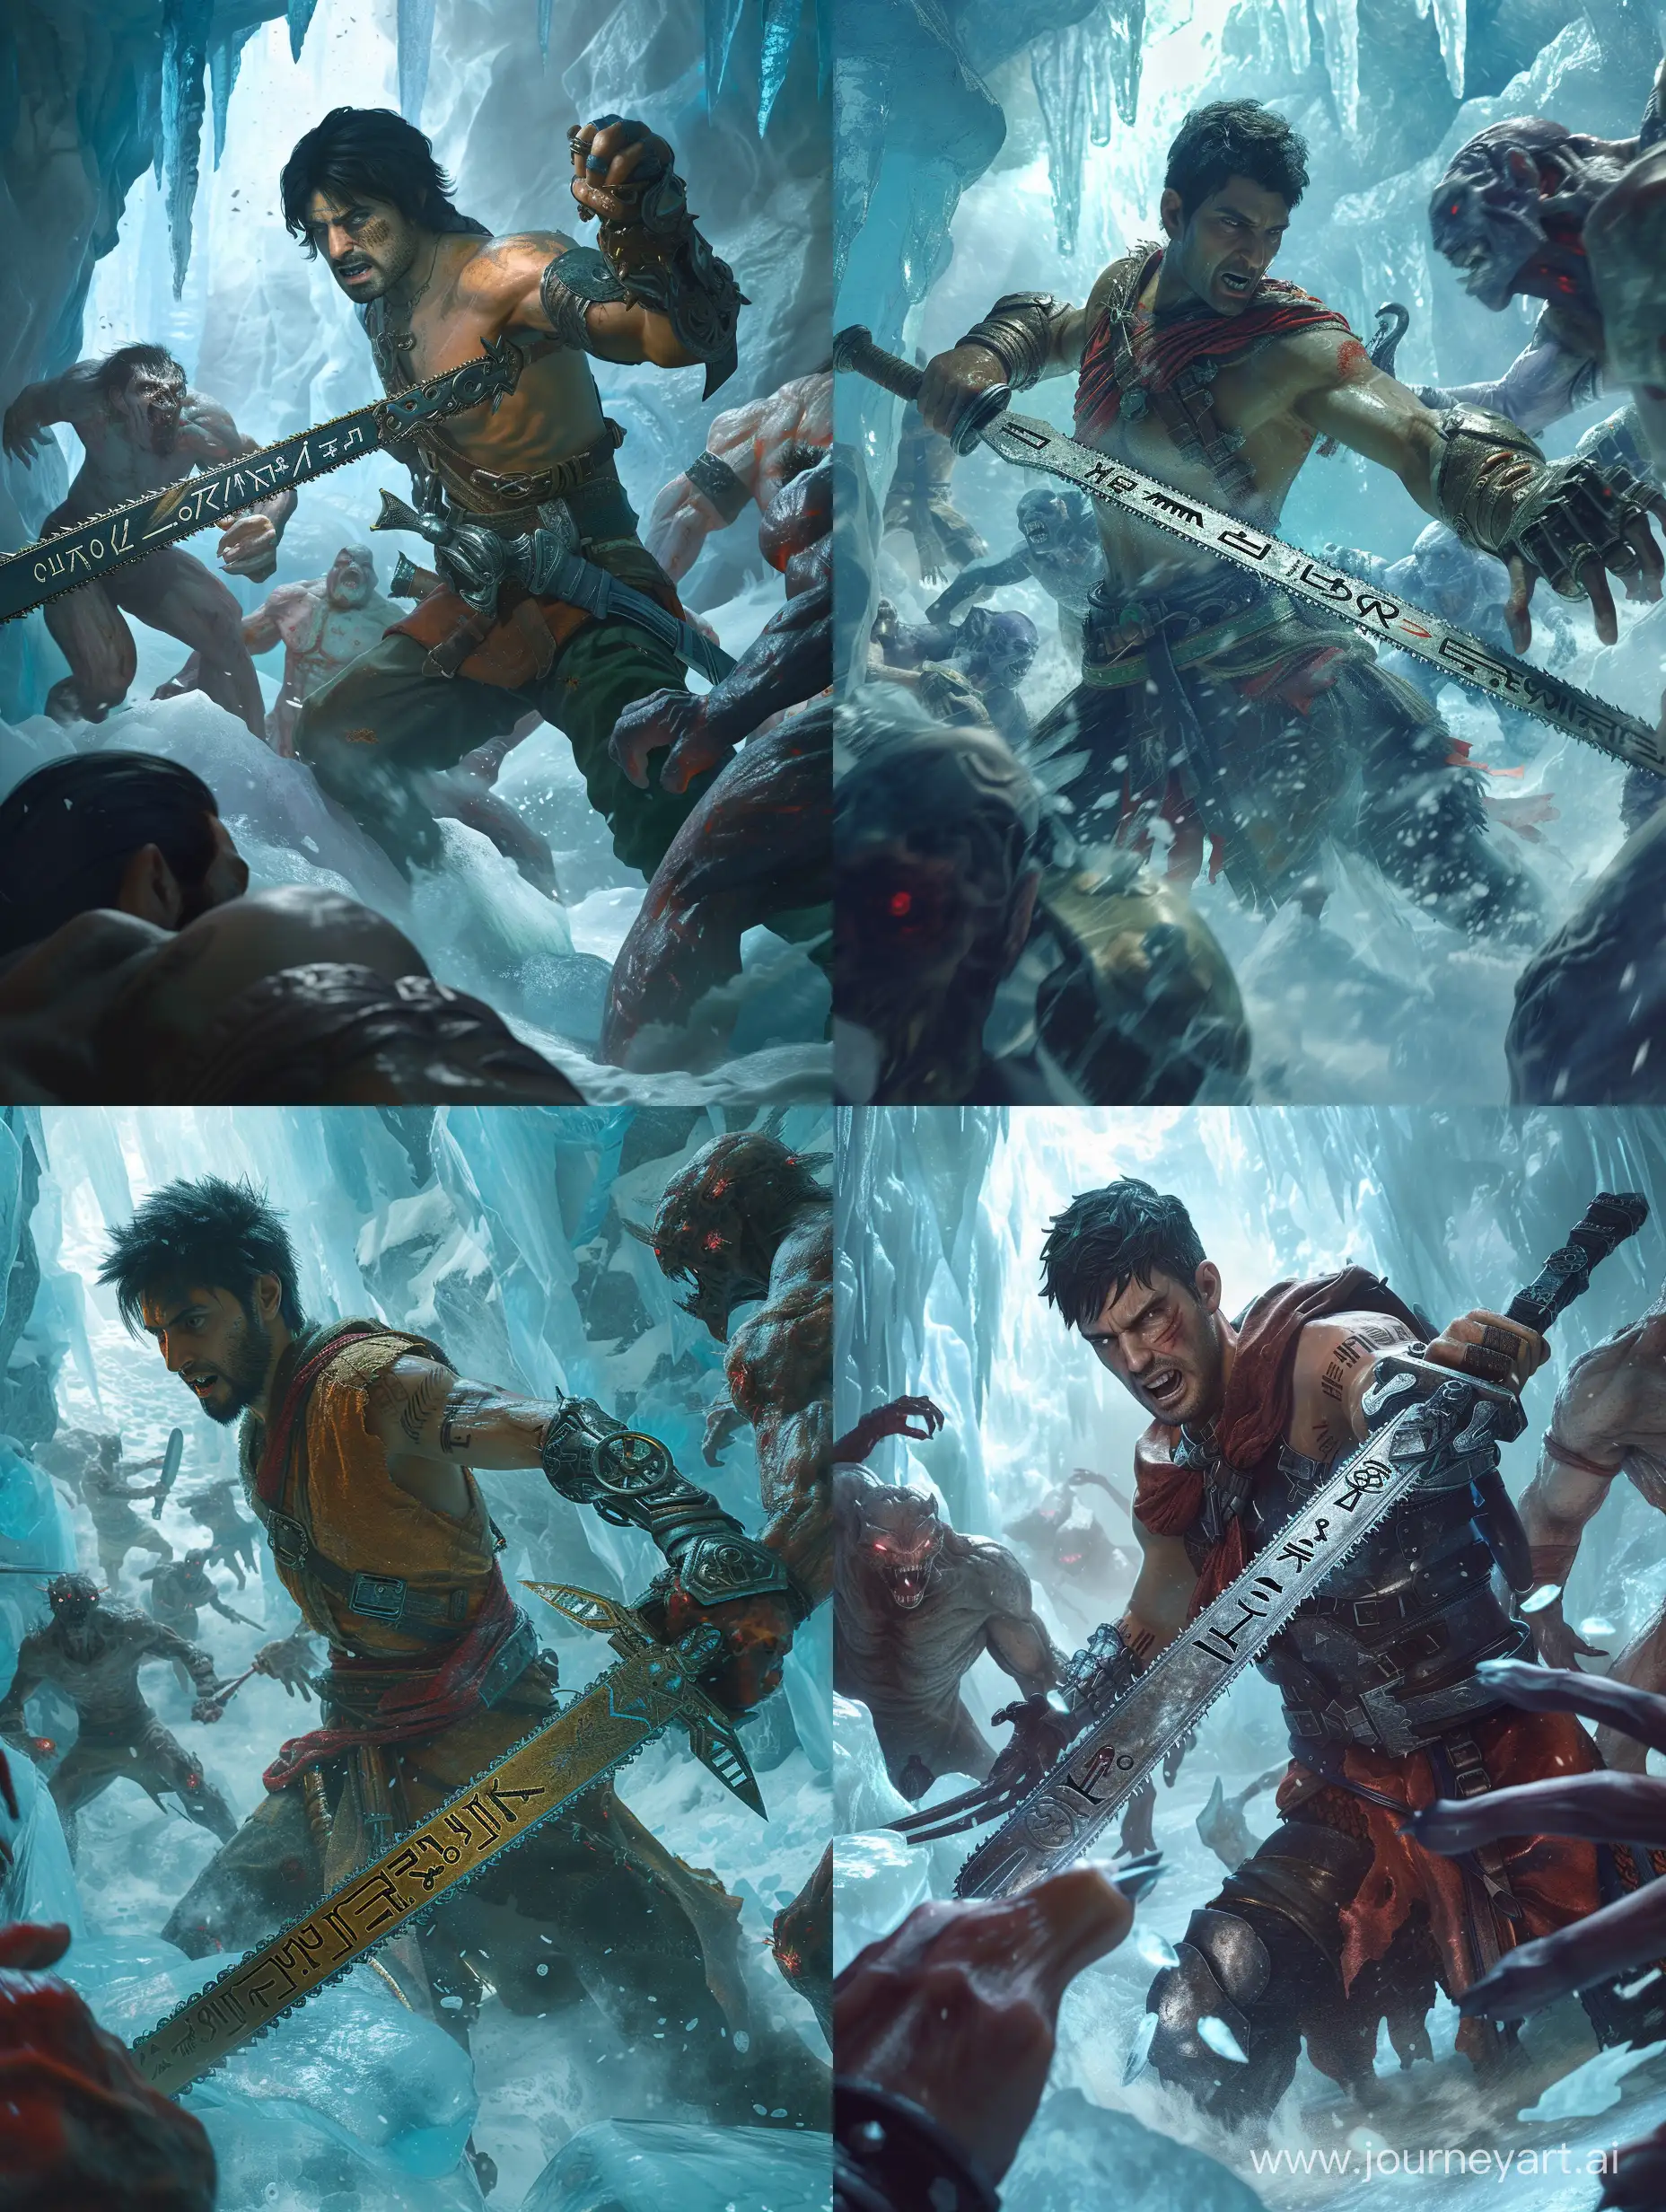 Persian-Warrior-Confronts-Ice-Creatures-with-Chainsaw-Sword-in-Steampunk-Ice-Cave